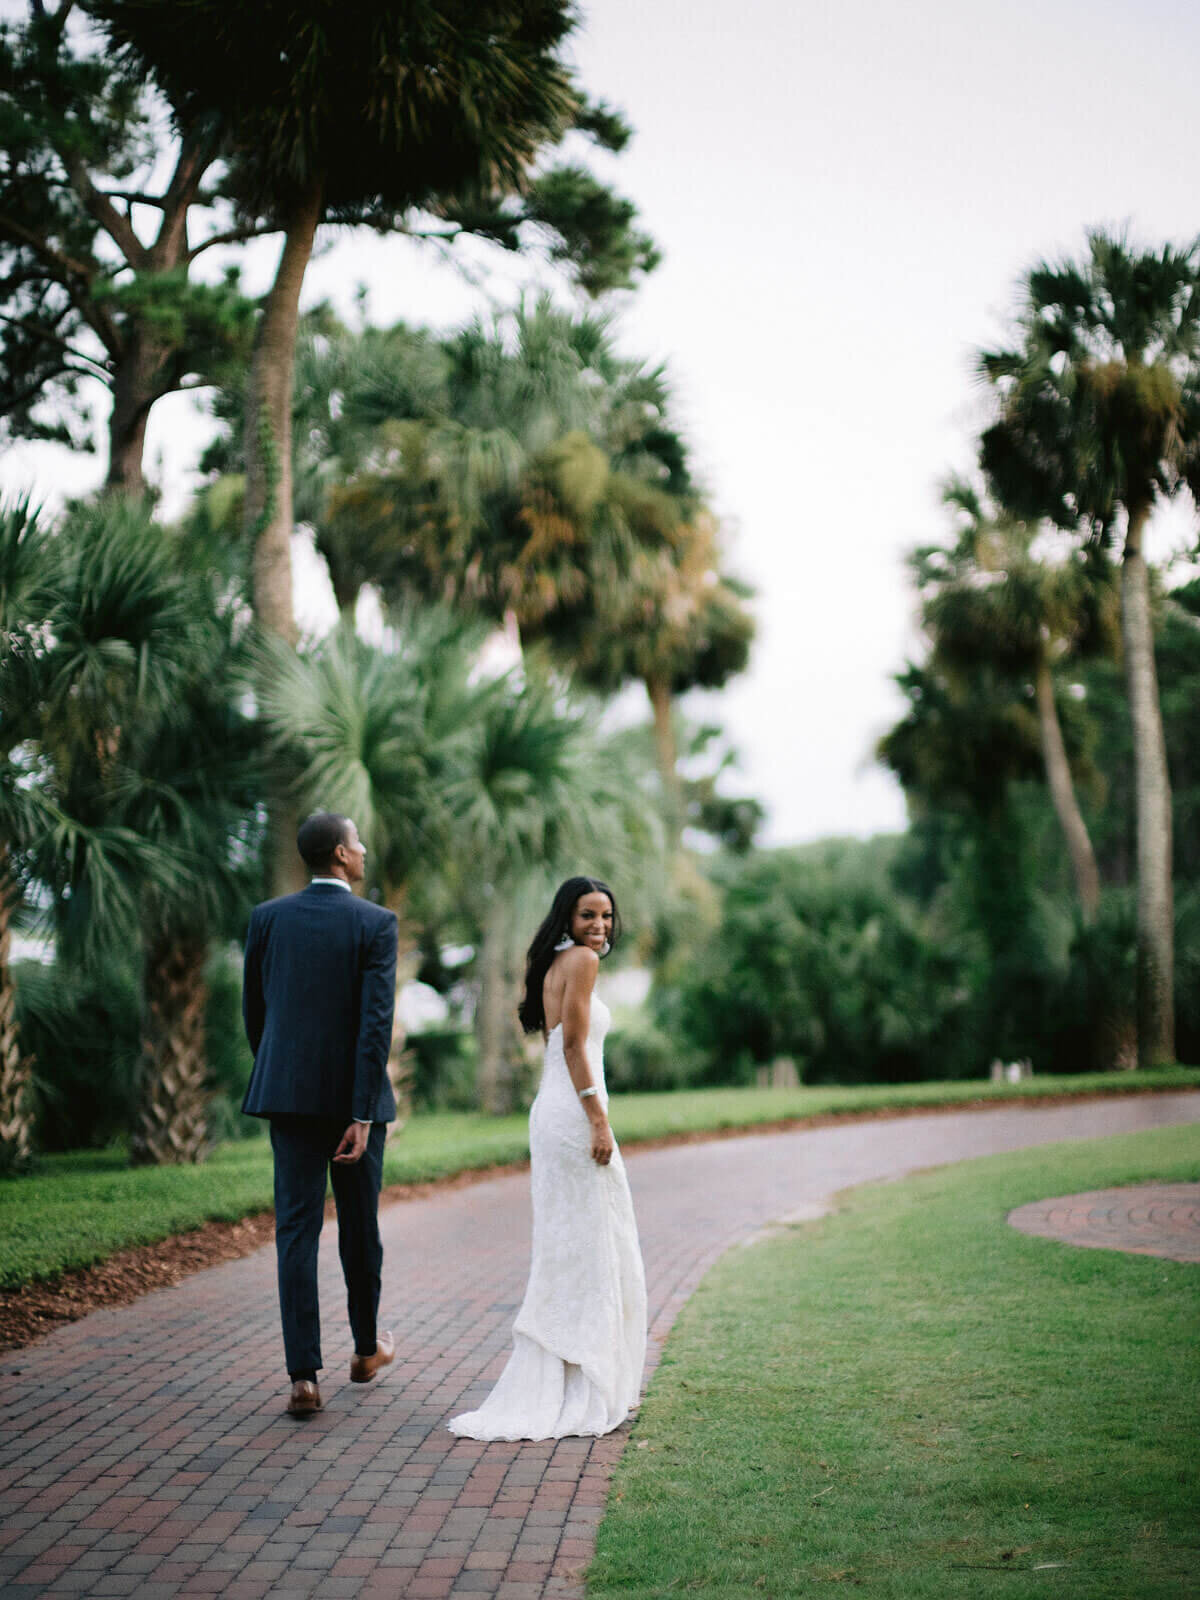 The bride and groom are walking in the well-manicured garden in Montage at Palmetto Bluff. Destination Image by Jenny Fu Studio